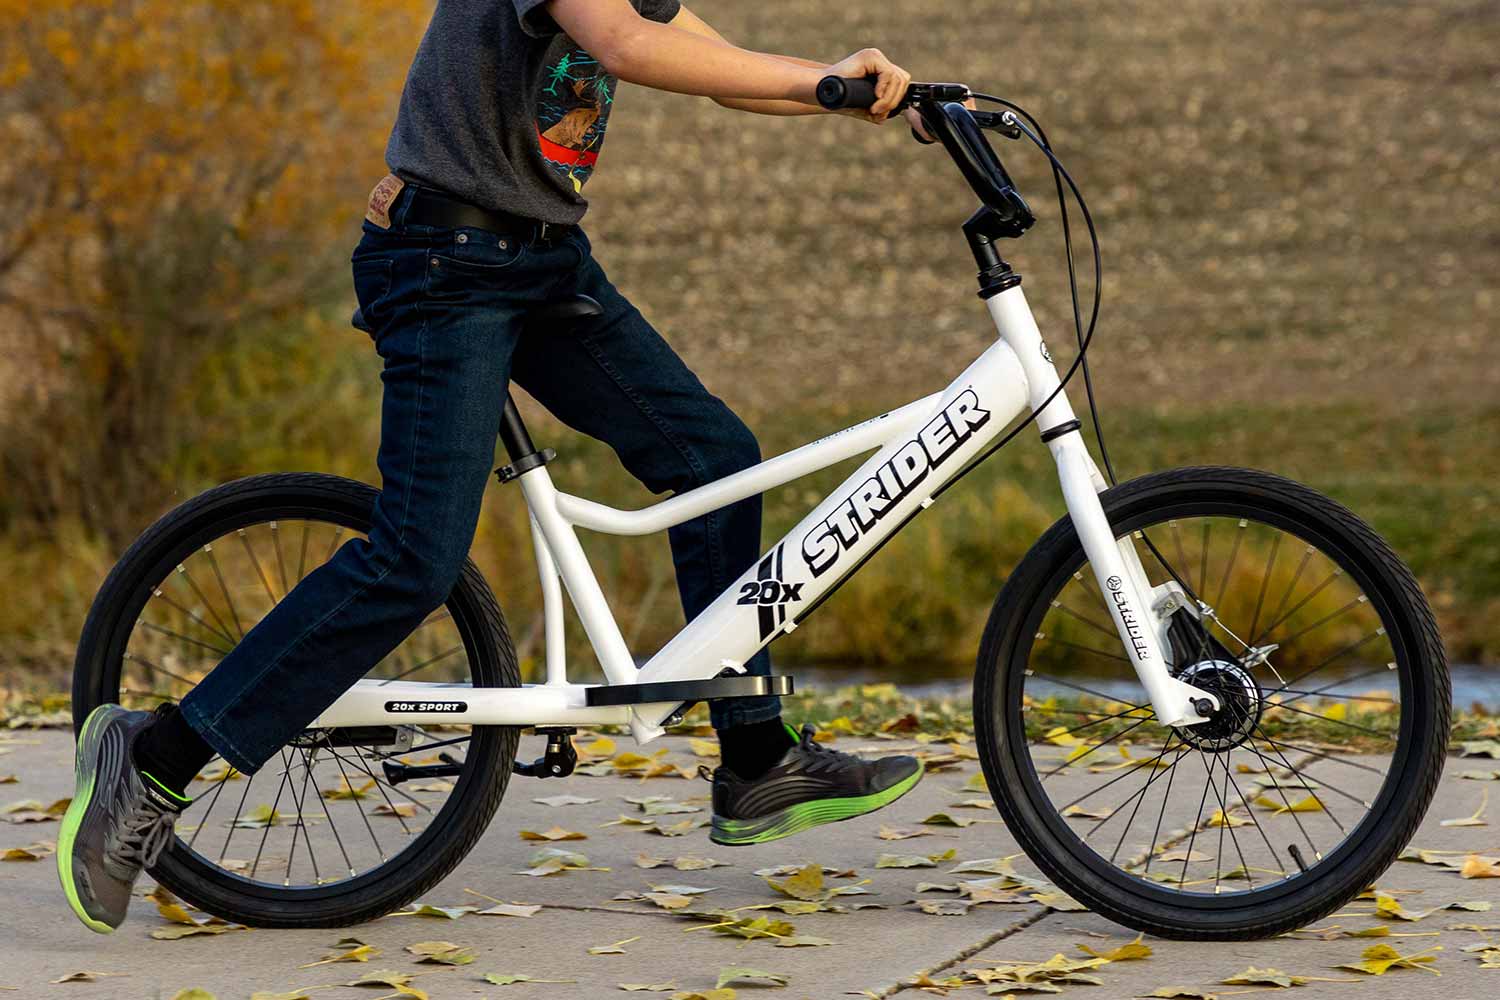 A rider using the Strider 20x Sport, a 20" all-in-one balance and pedal bike